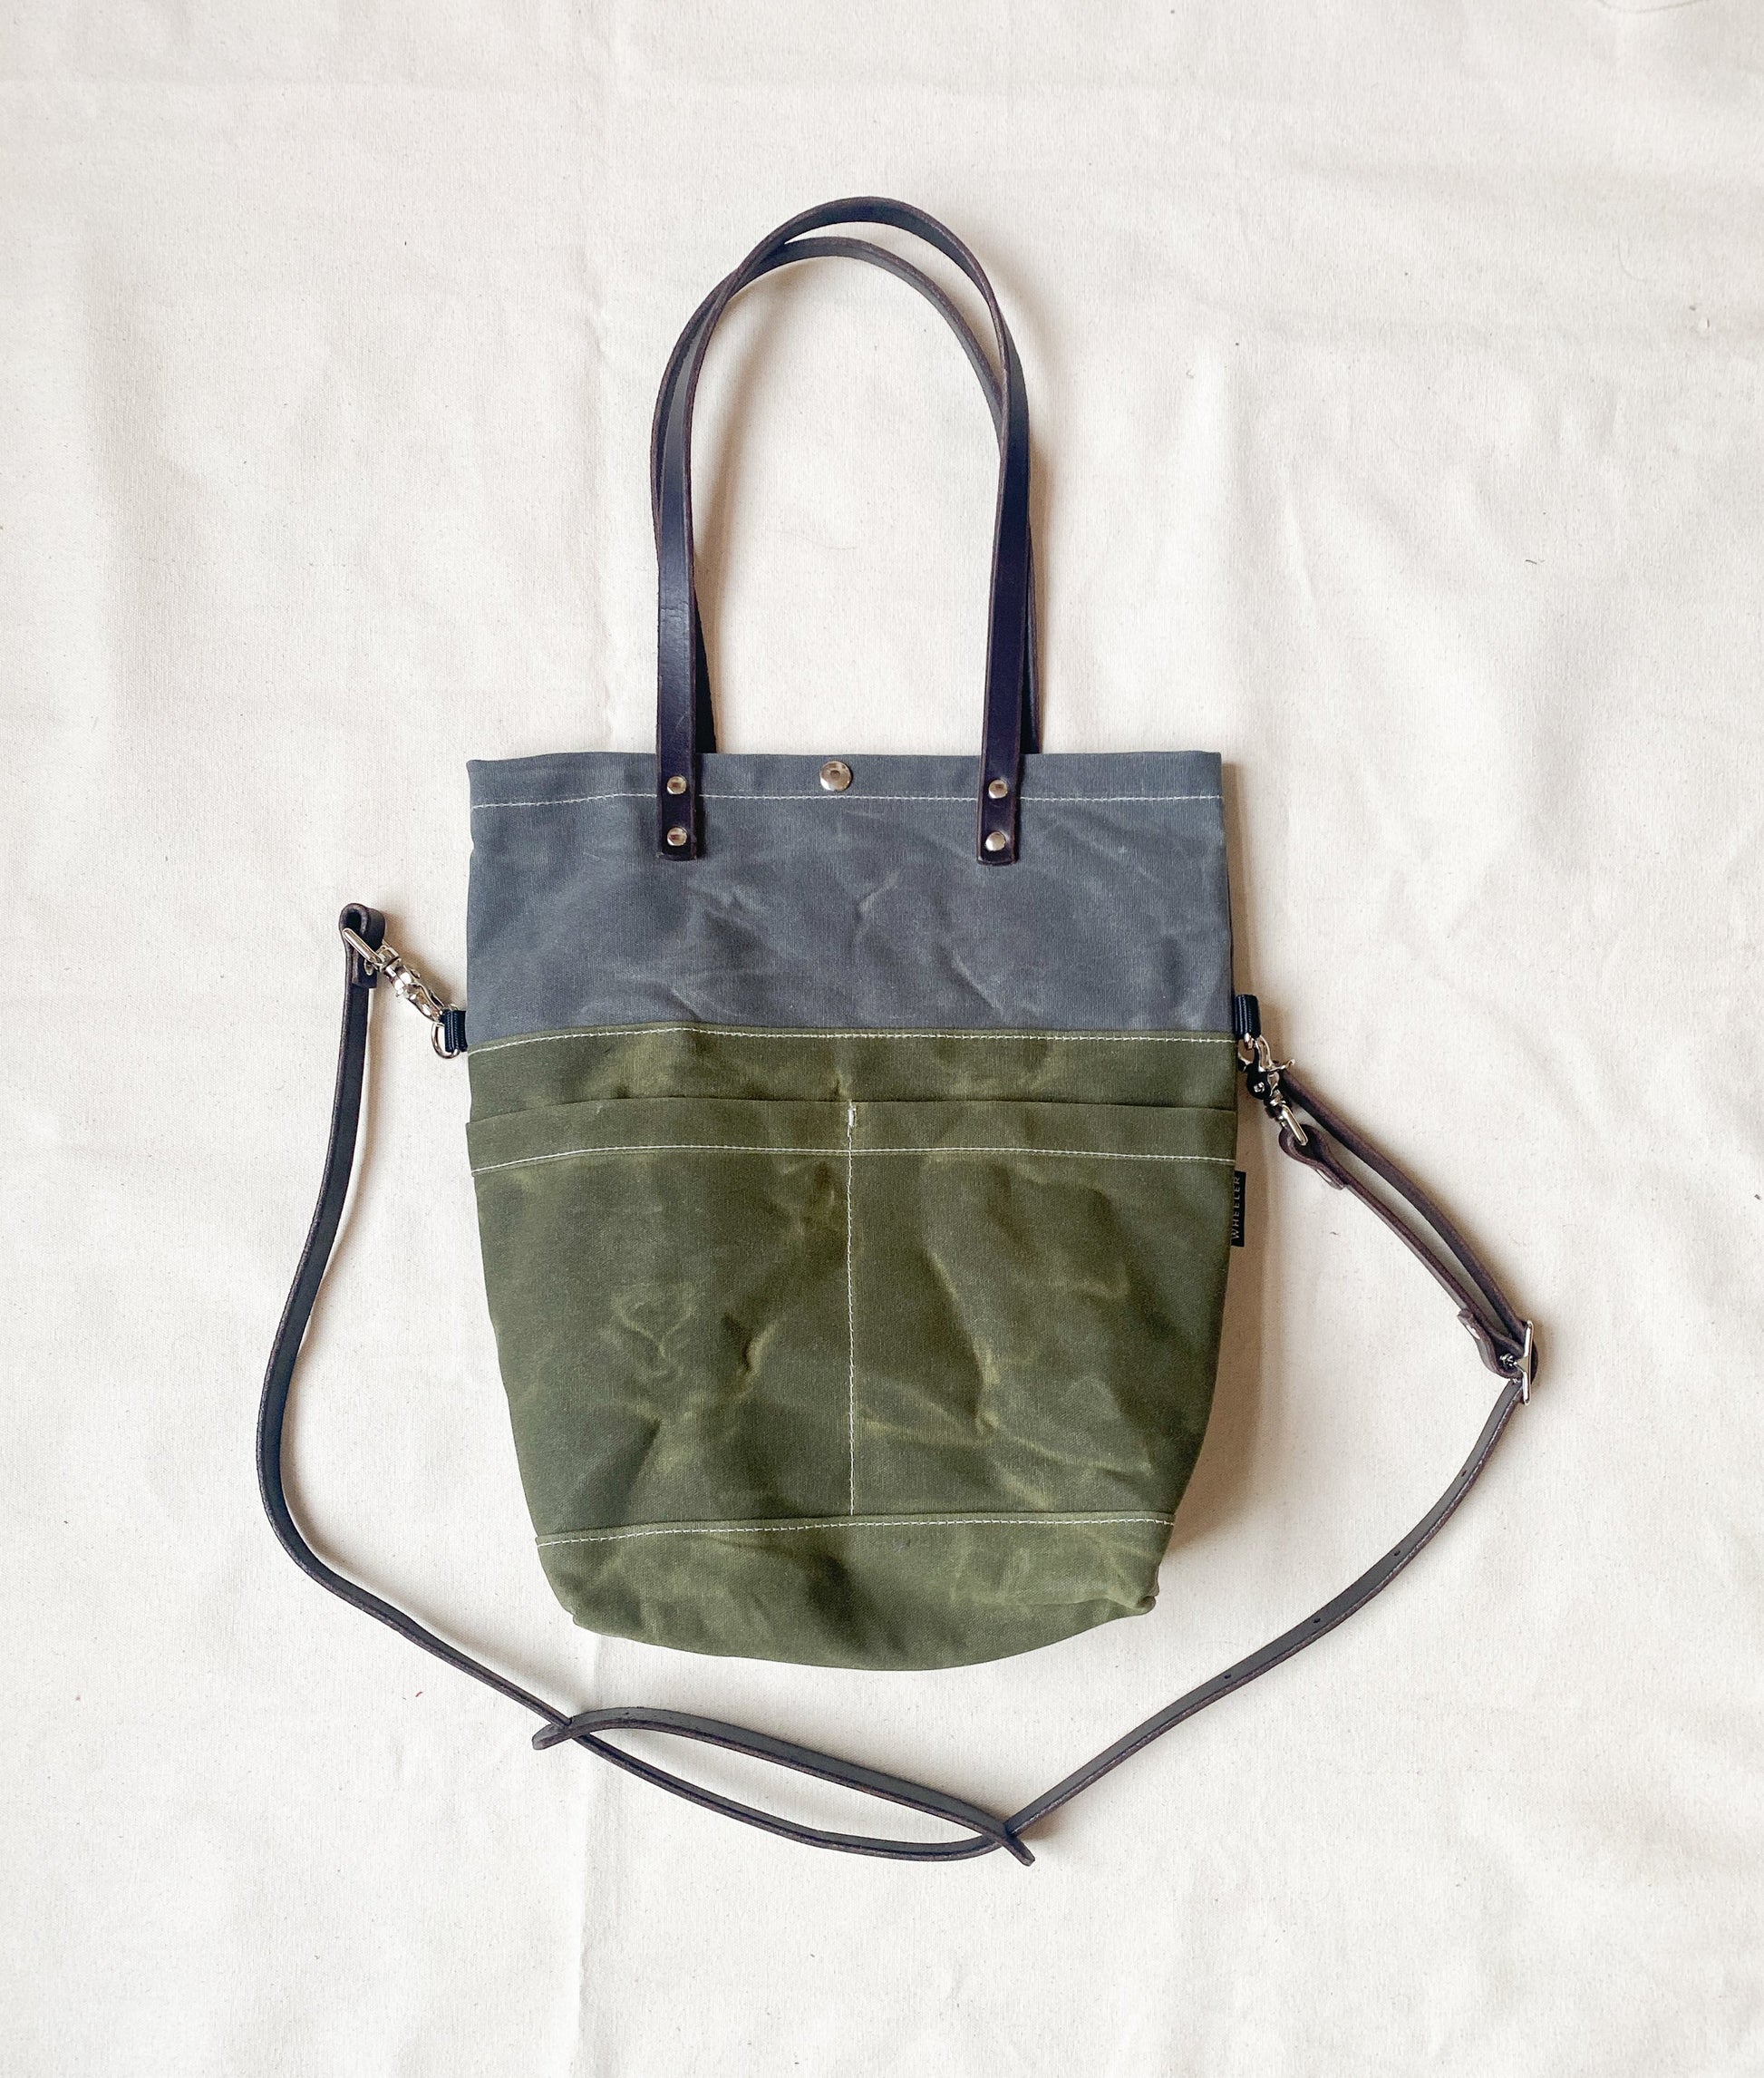 Large bag for every day use. Handles fold down to side when carried crossbody in Slate and Olive. 